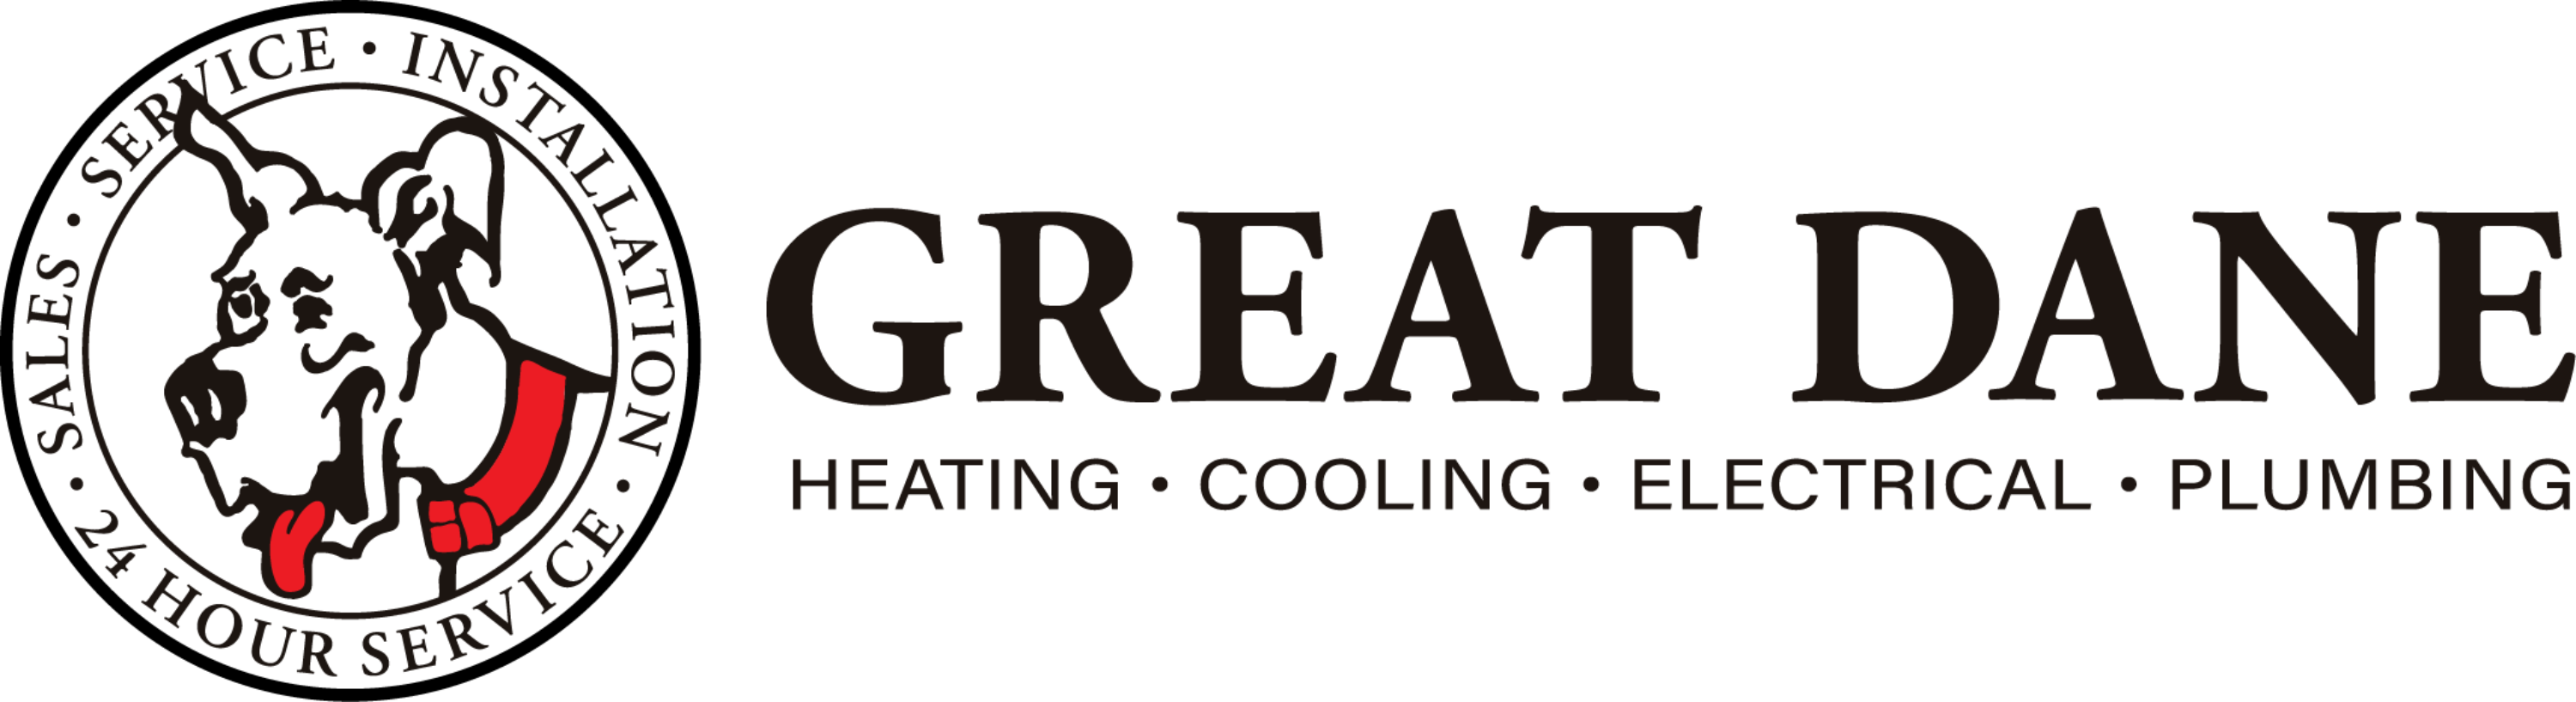 GREAT DANE HEATING & AIR CONDITIONING